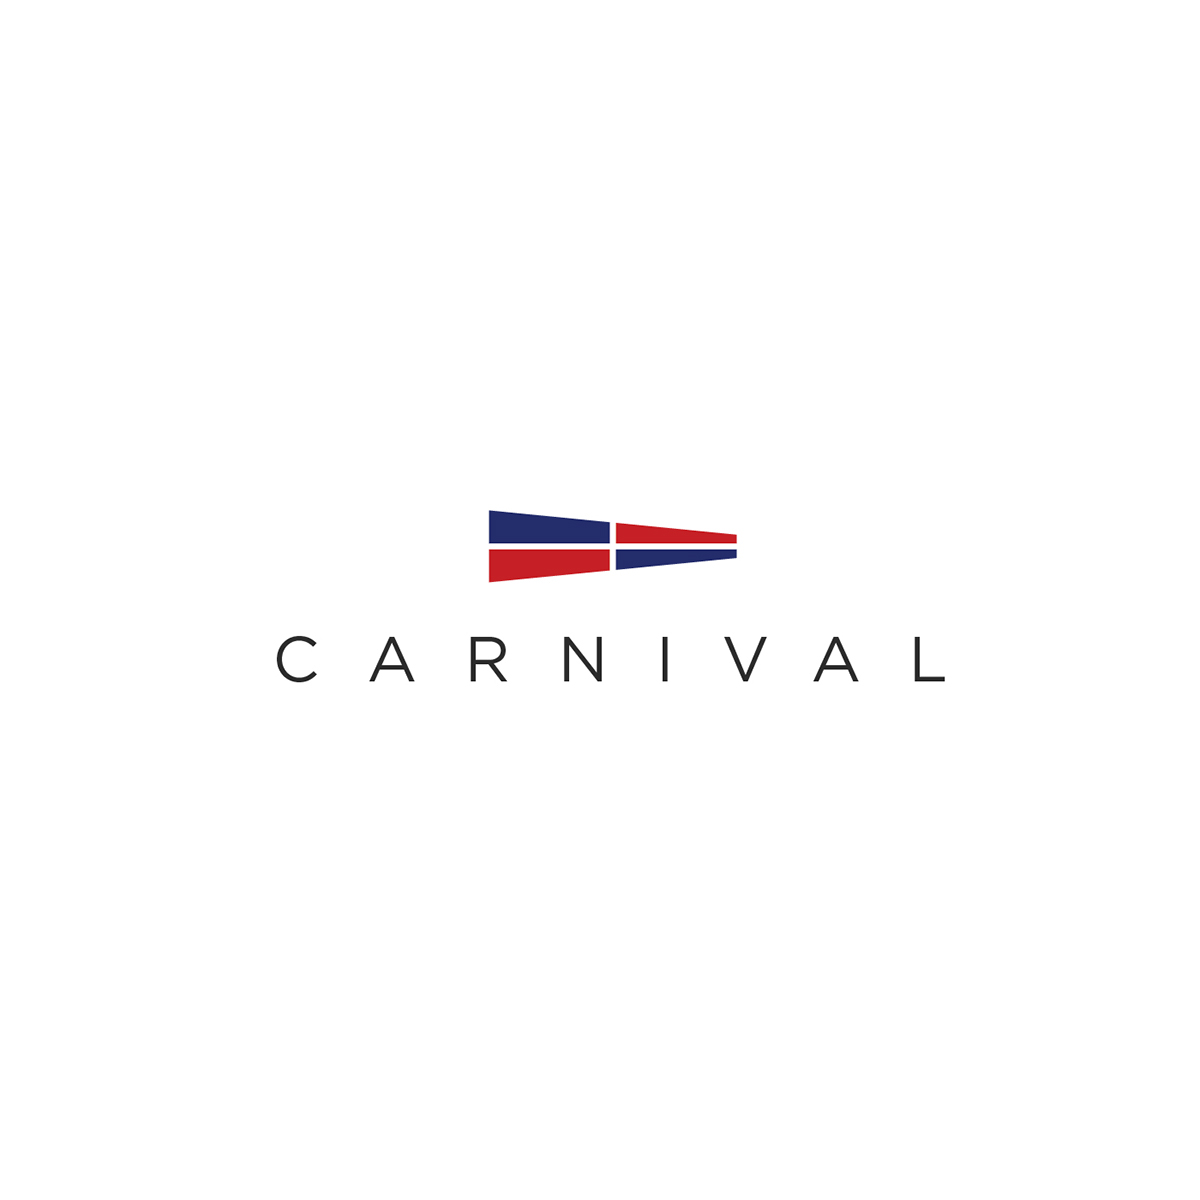 Rebrand rebranding logo identity Carnival cruise Cruises blue red Stationery simple modern clean design graphic